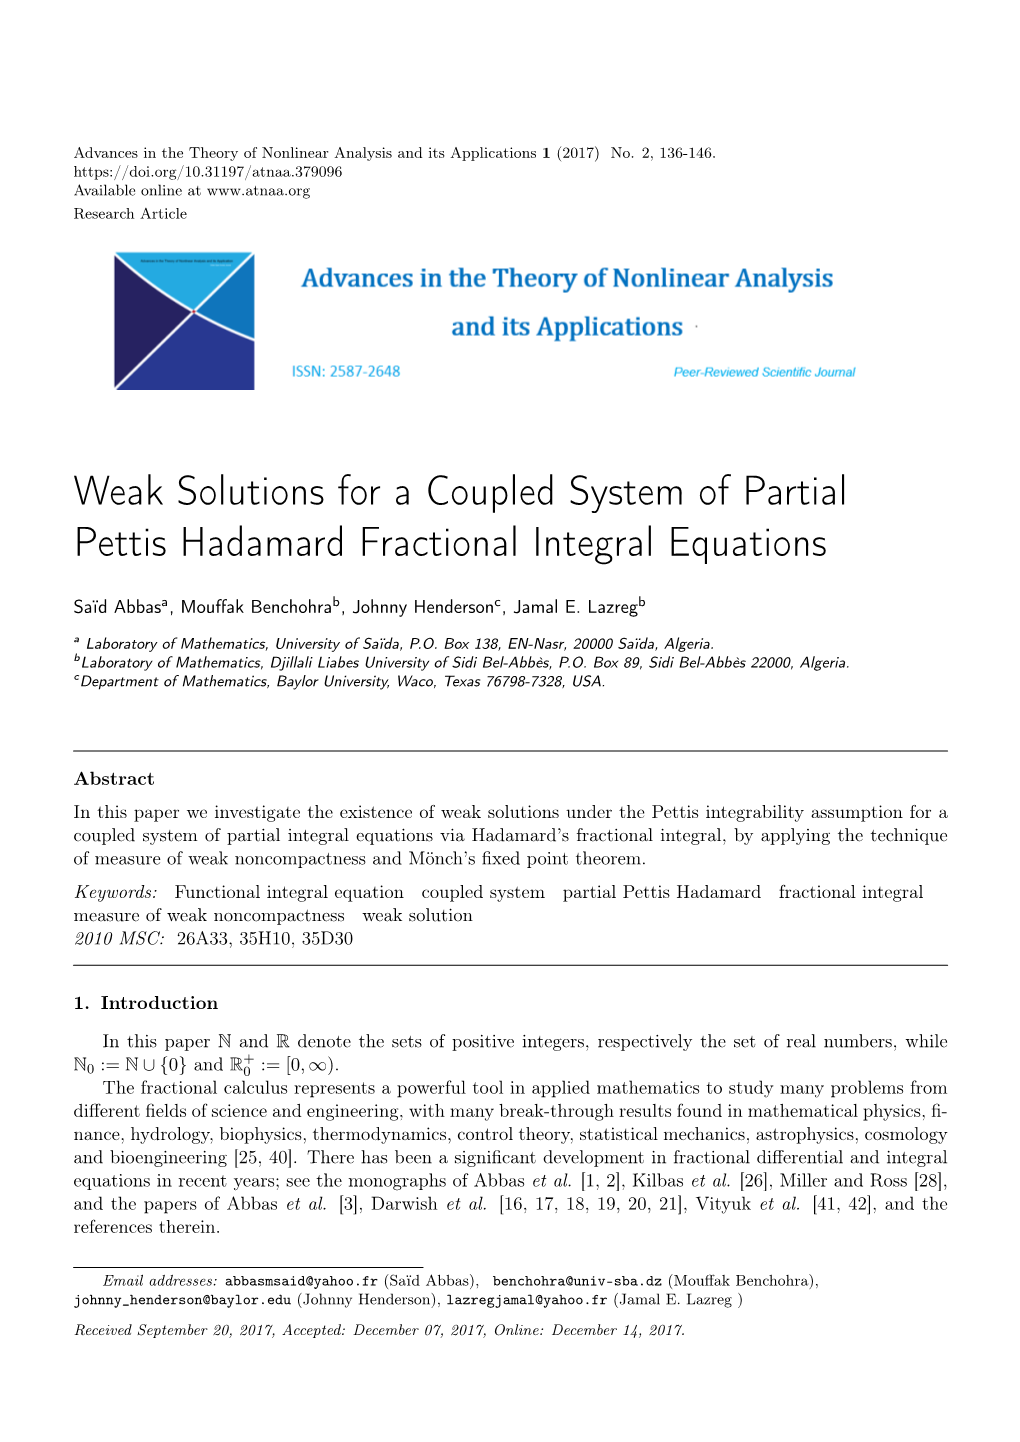 Weak Solutions for a Coupled System of Partial Pettis Hadamard Fractional Integral Equations